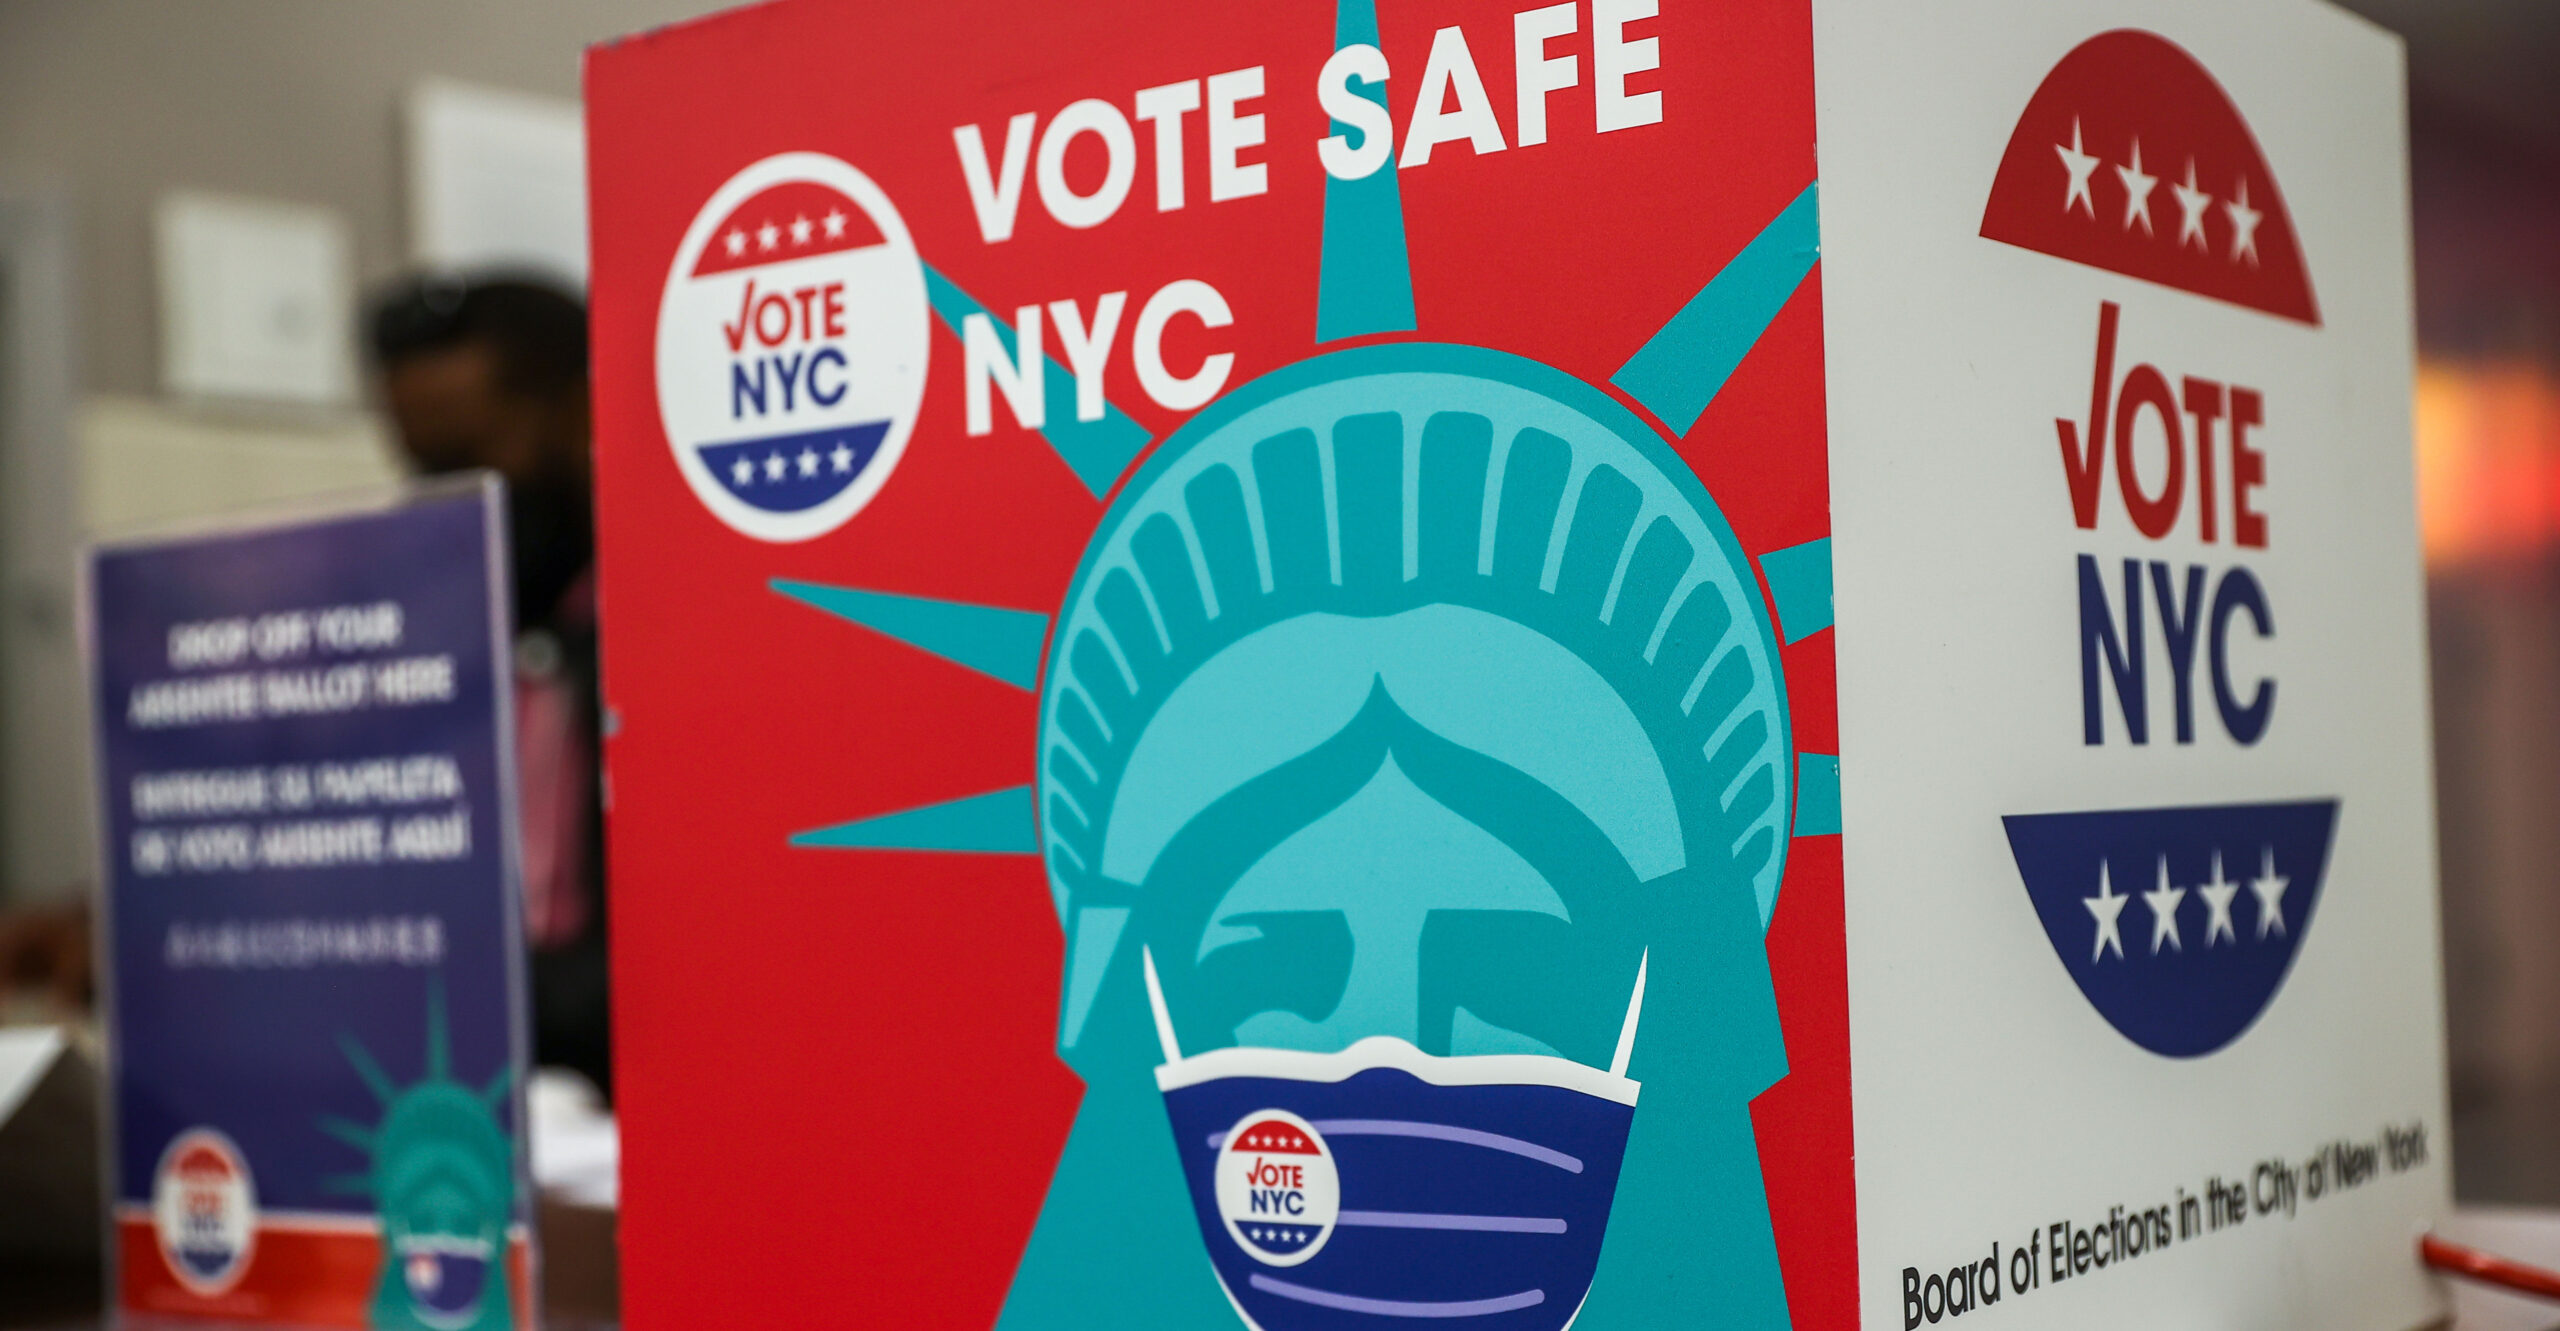 NYC's New Law Allowing Noncitizens to Vote Is Unconstitutional. I'm Suing to Kill It.